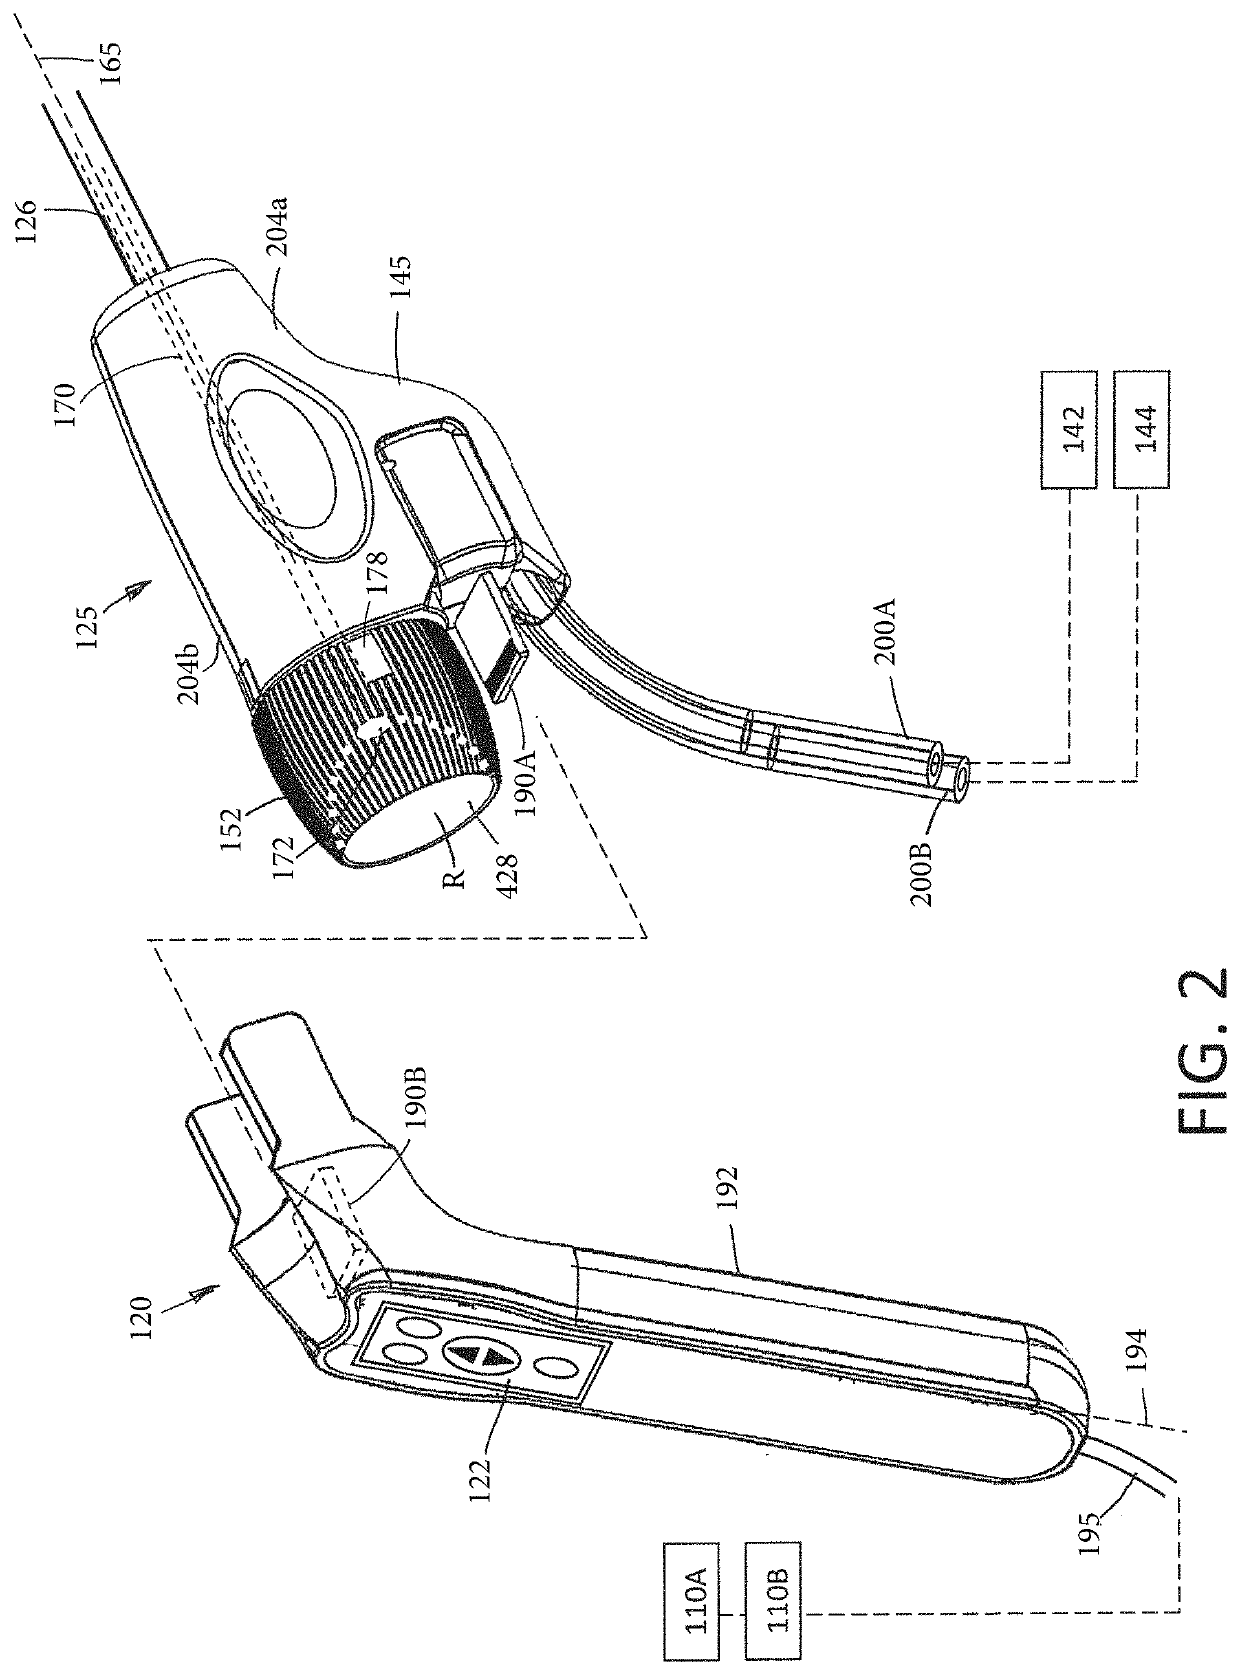 Endoscope and method of use